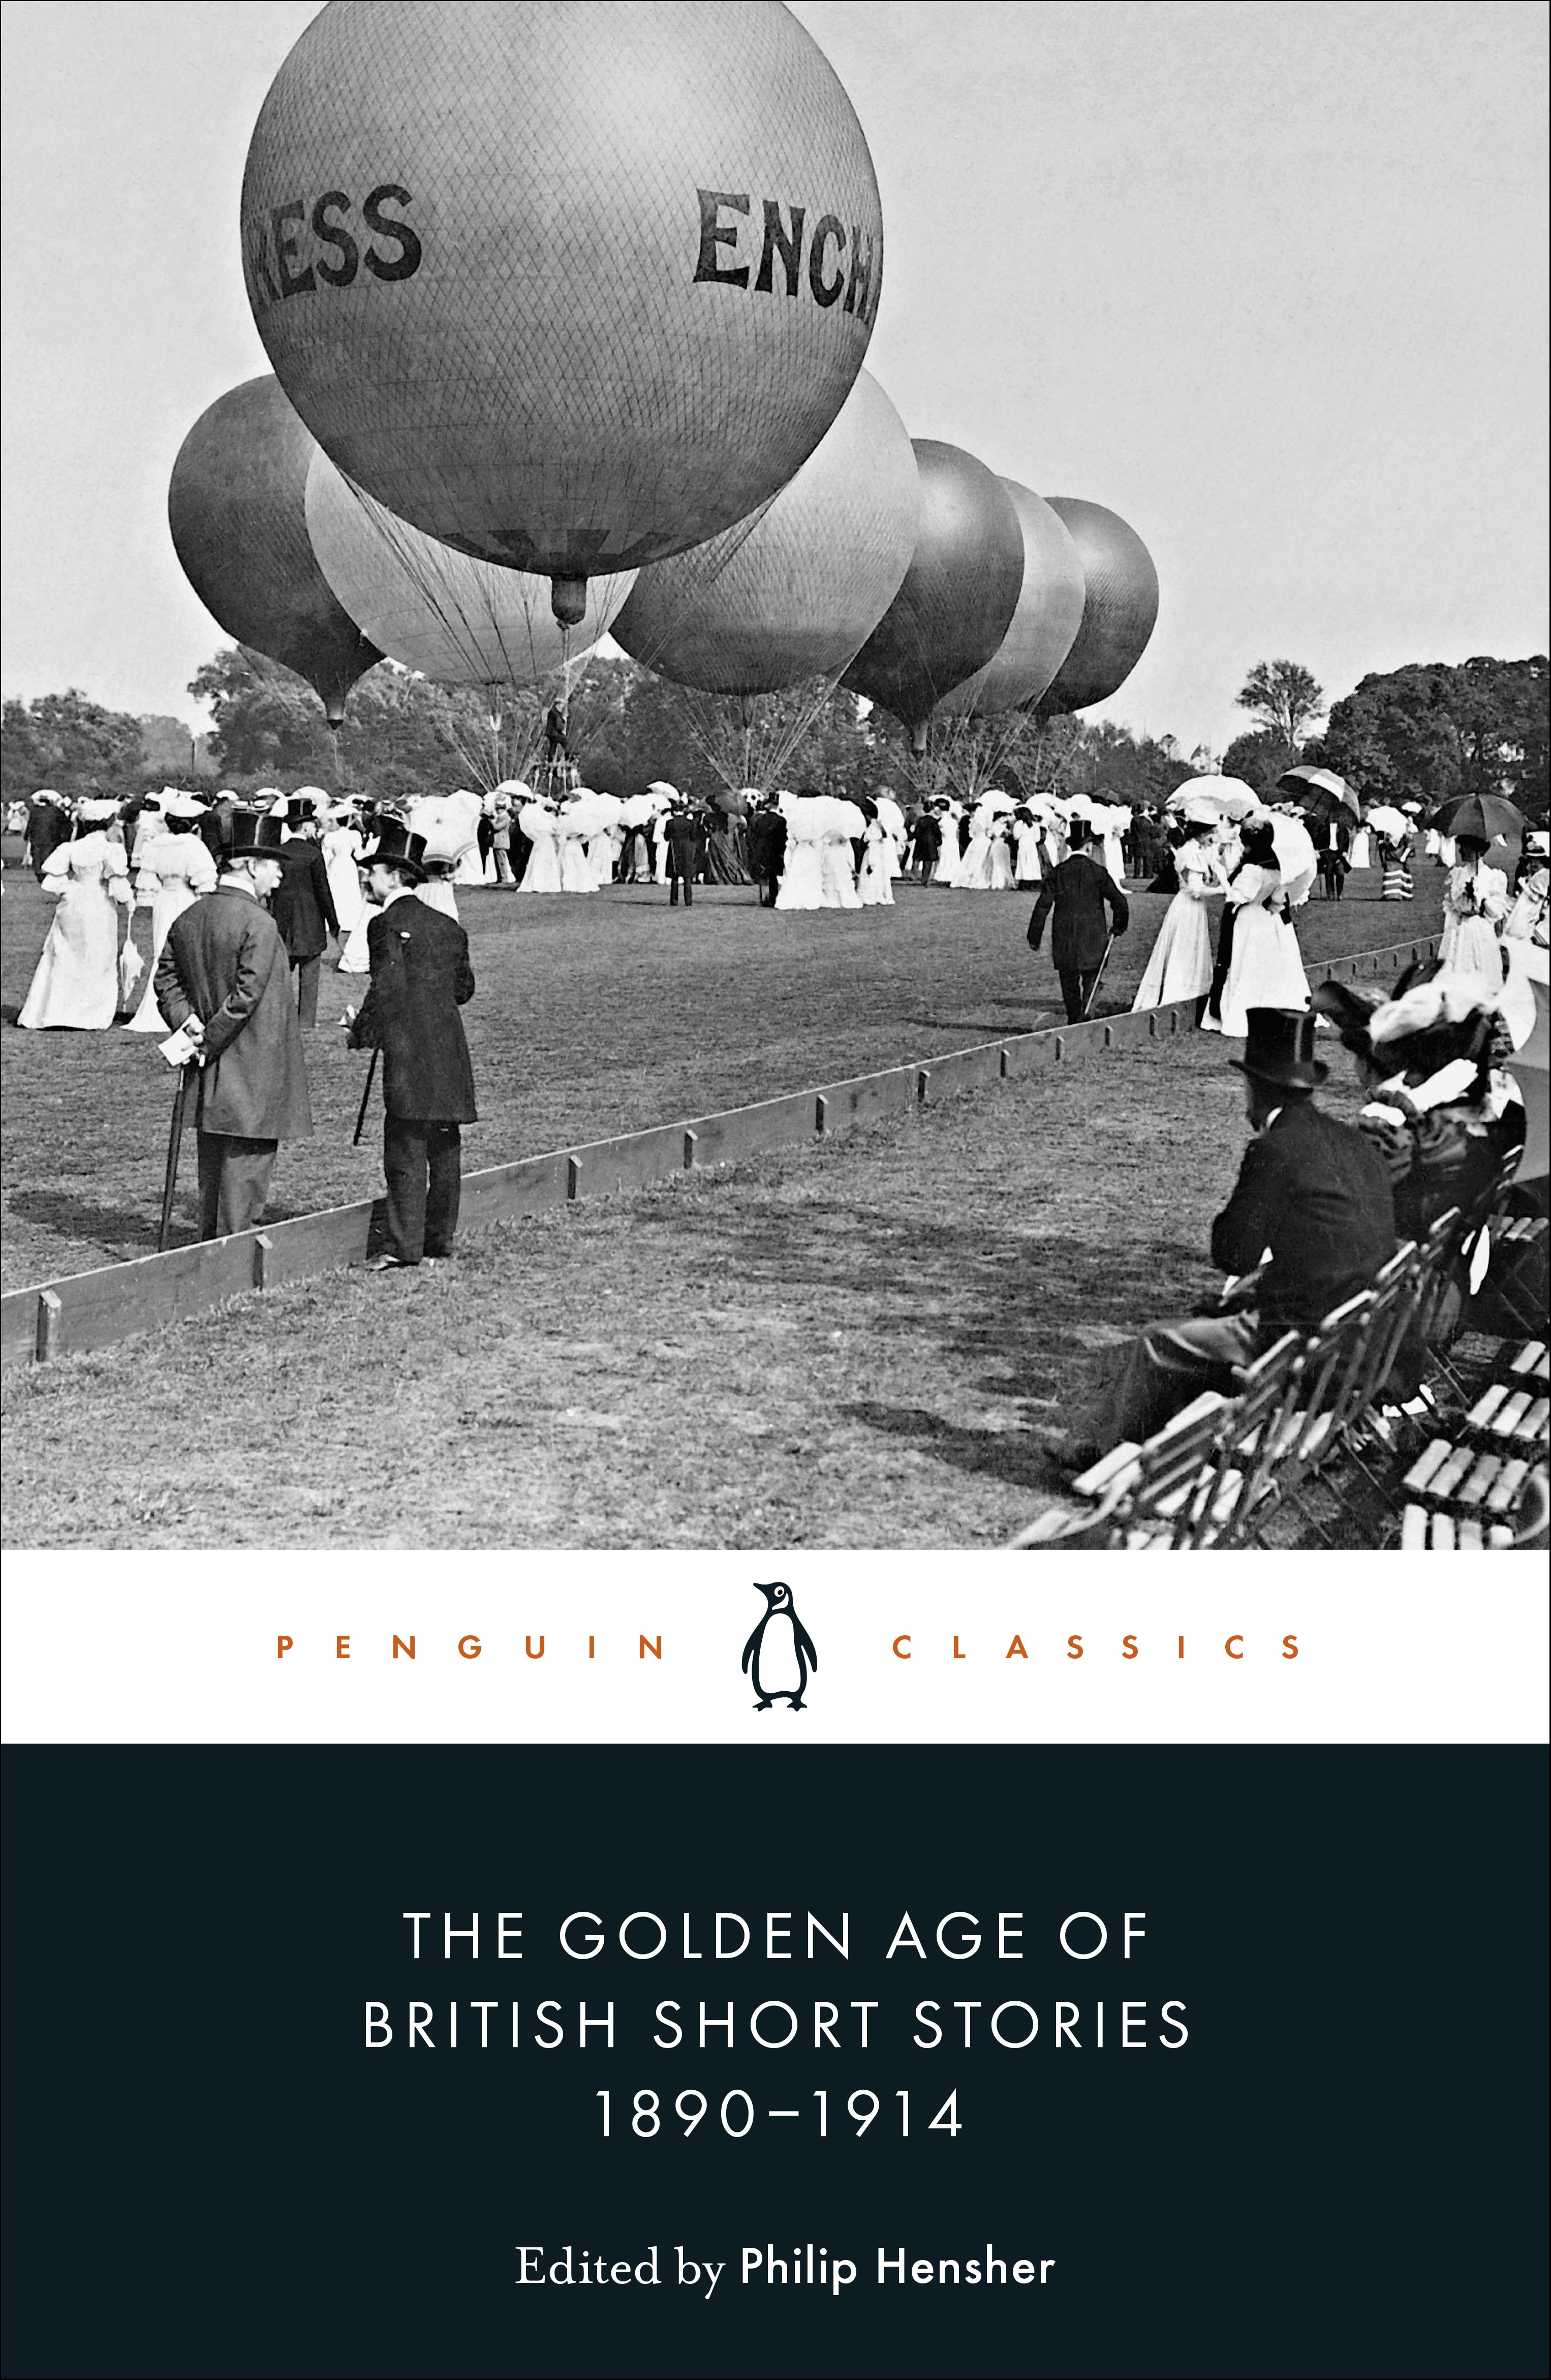 Book “The Golden Age of British Short Stories 1890-1914” by Philip Hensher — June 24, 2021